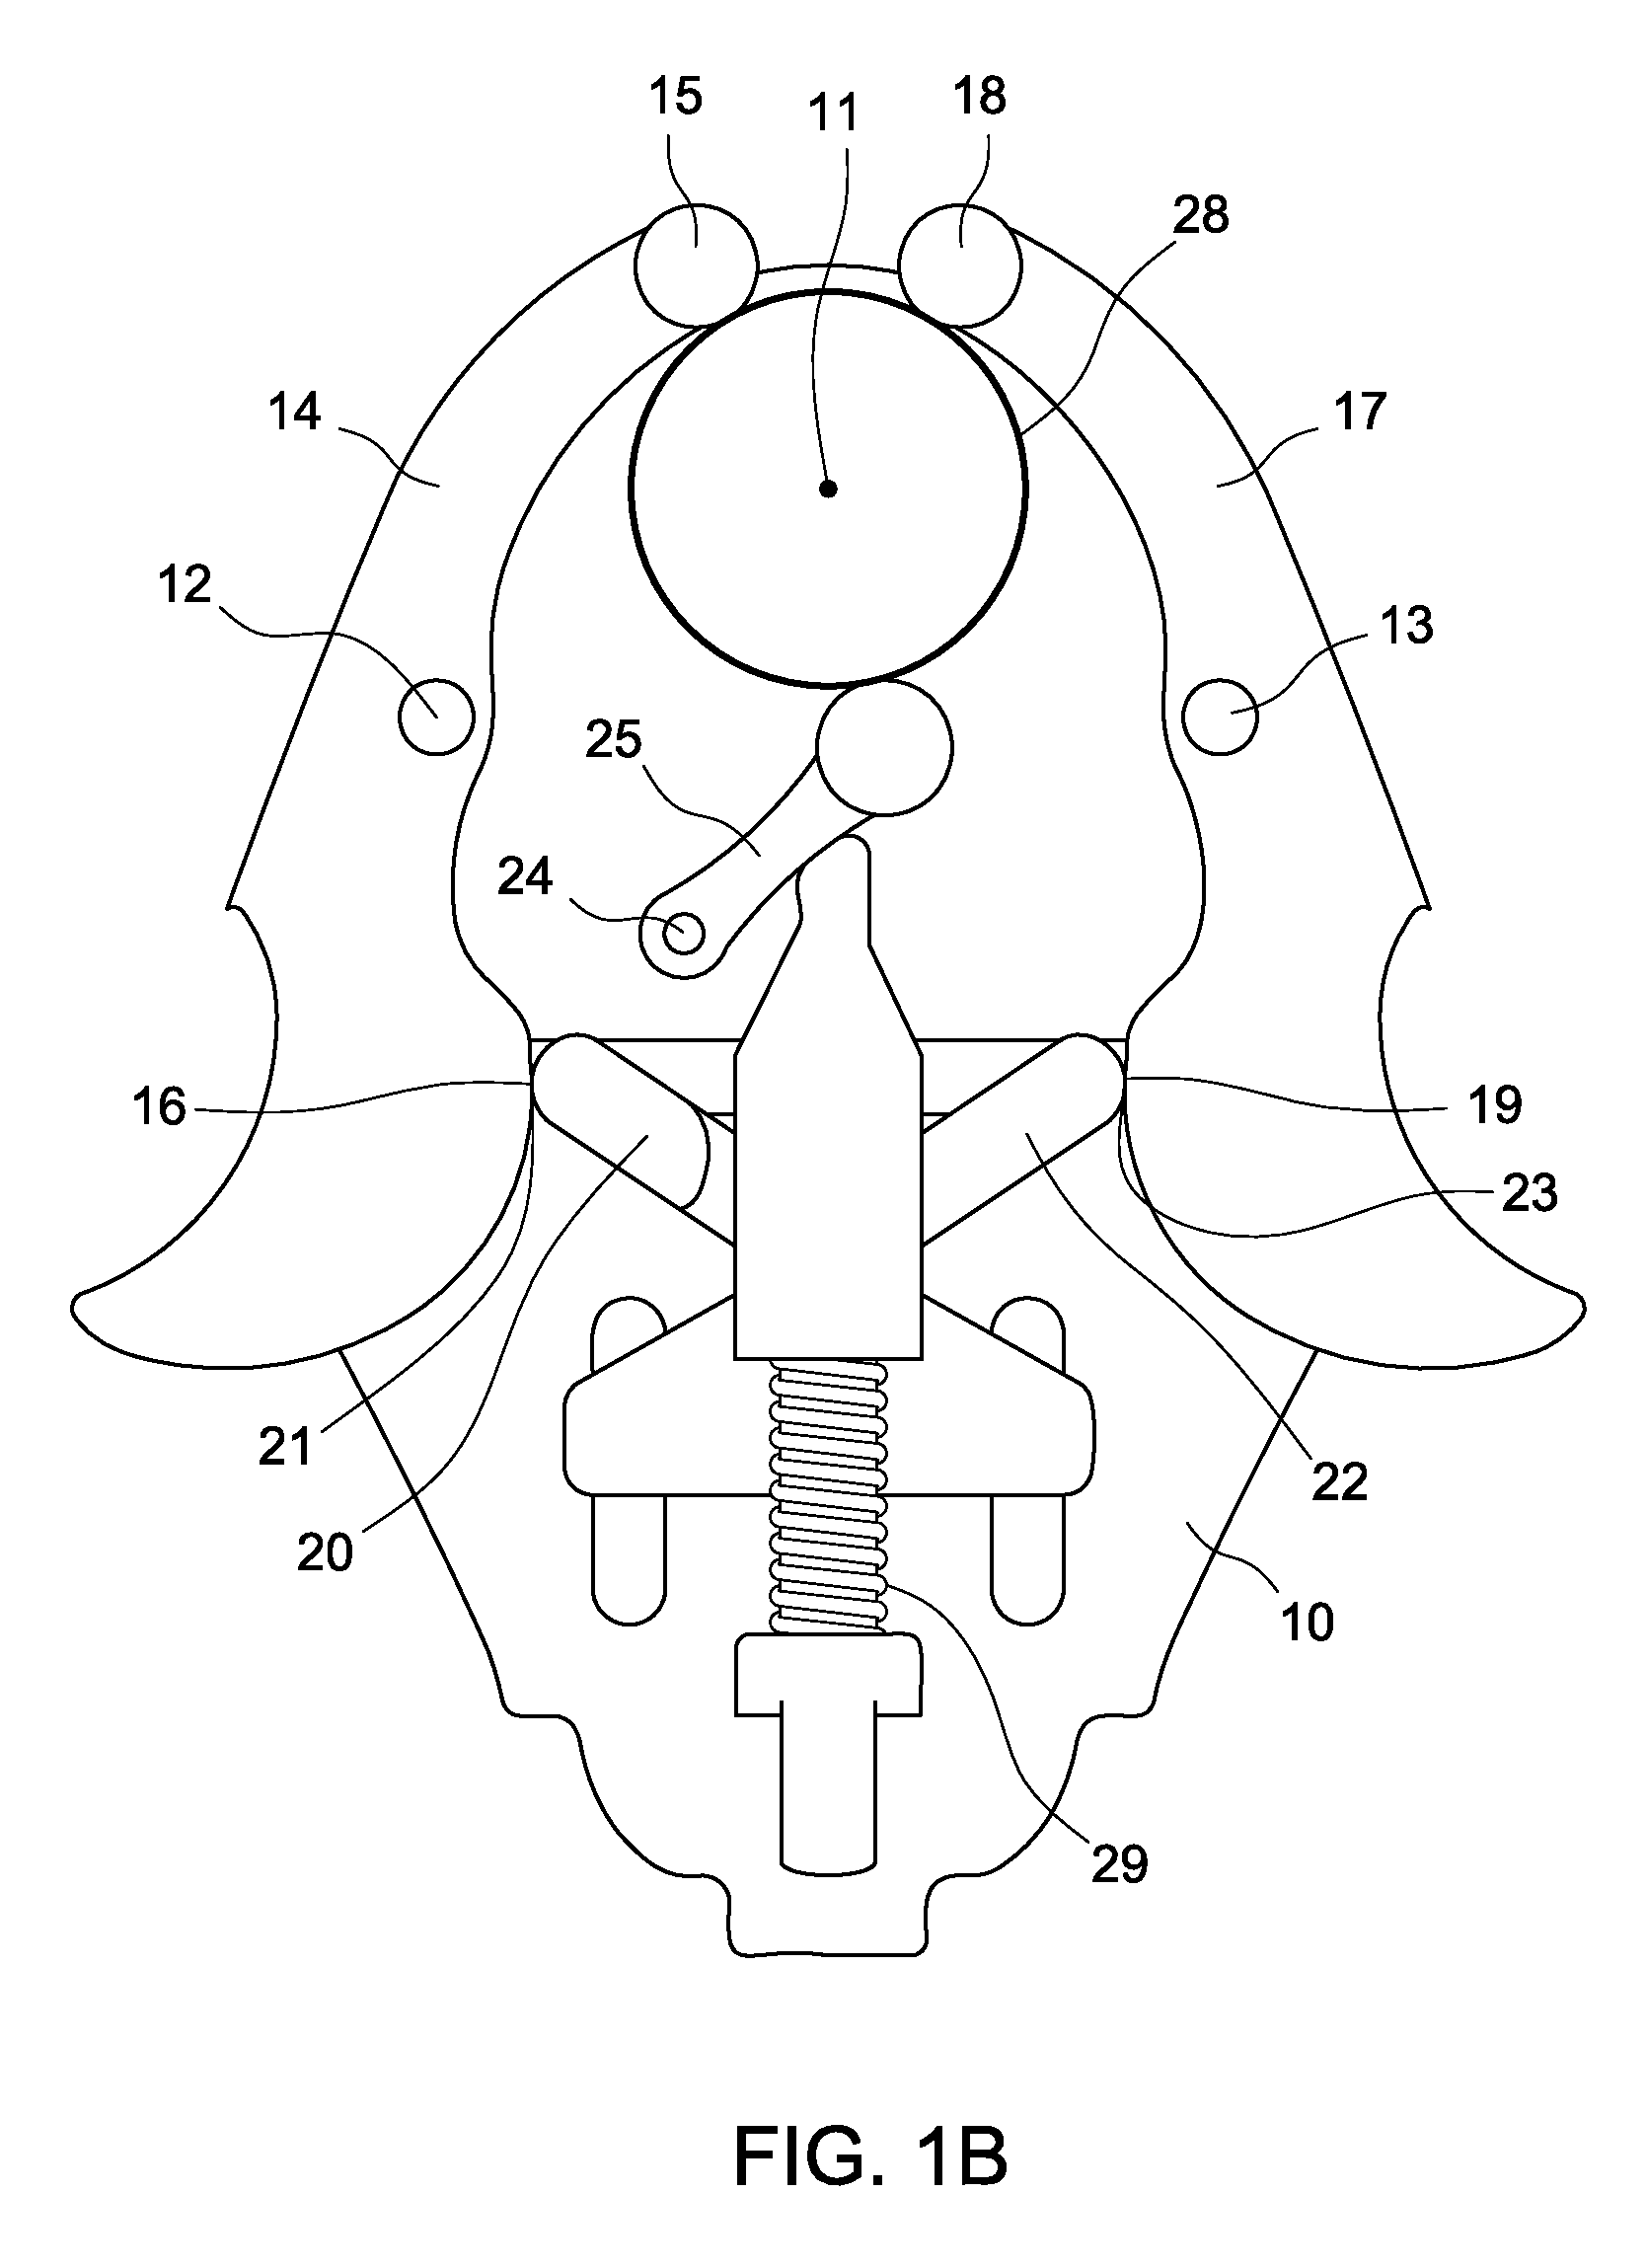 Self-centering mechanism, a clamping device for an electronic device and means for their integration